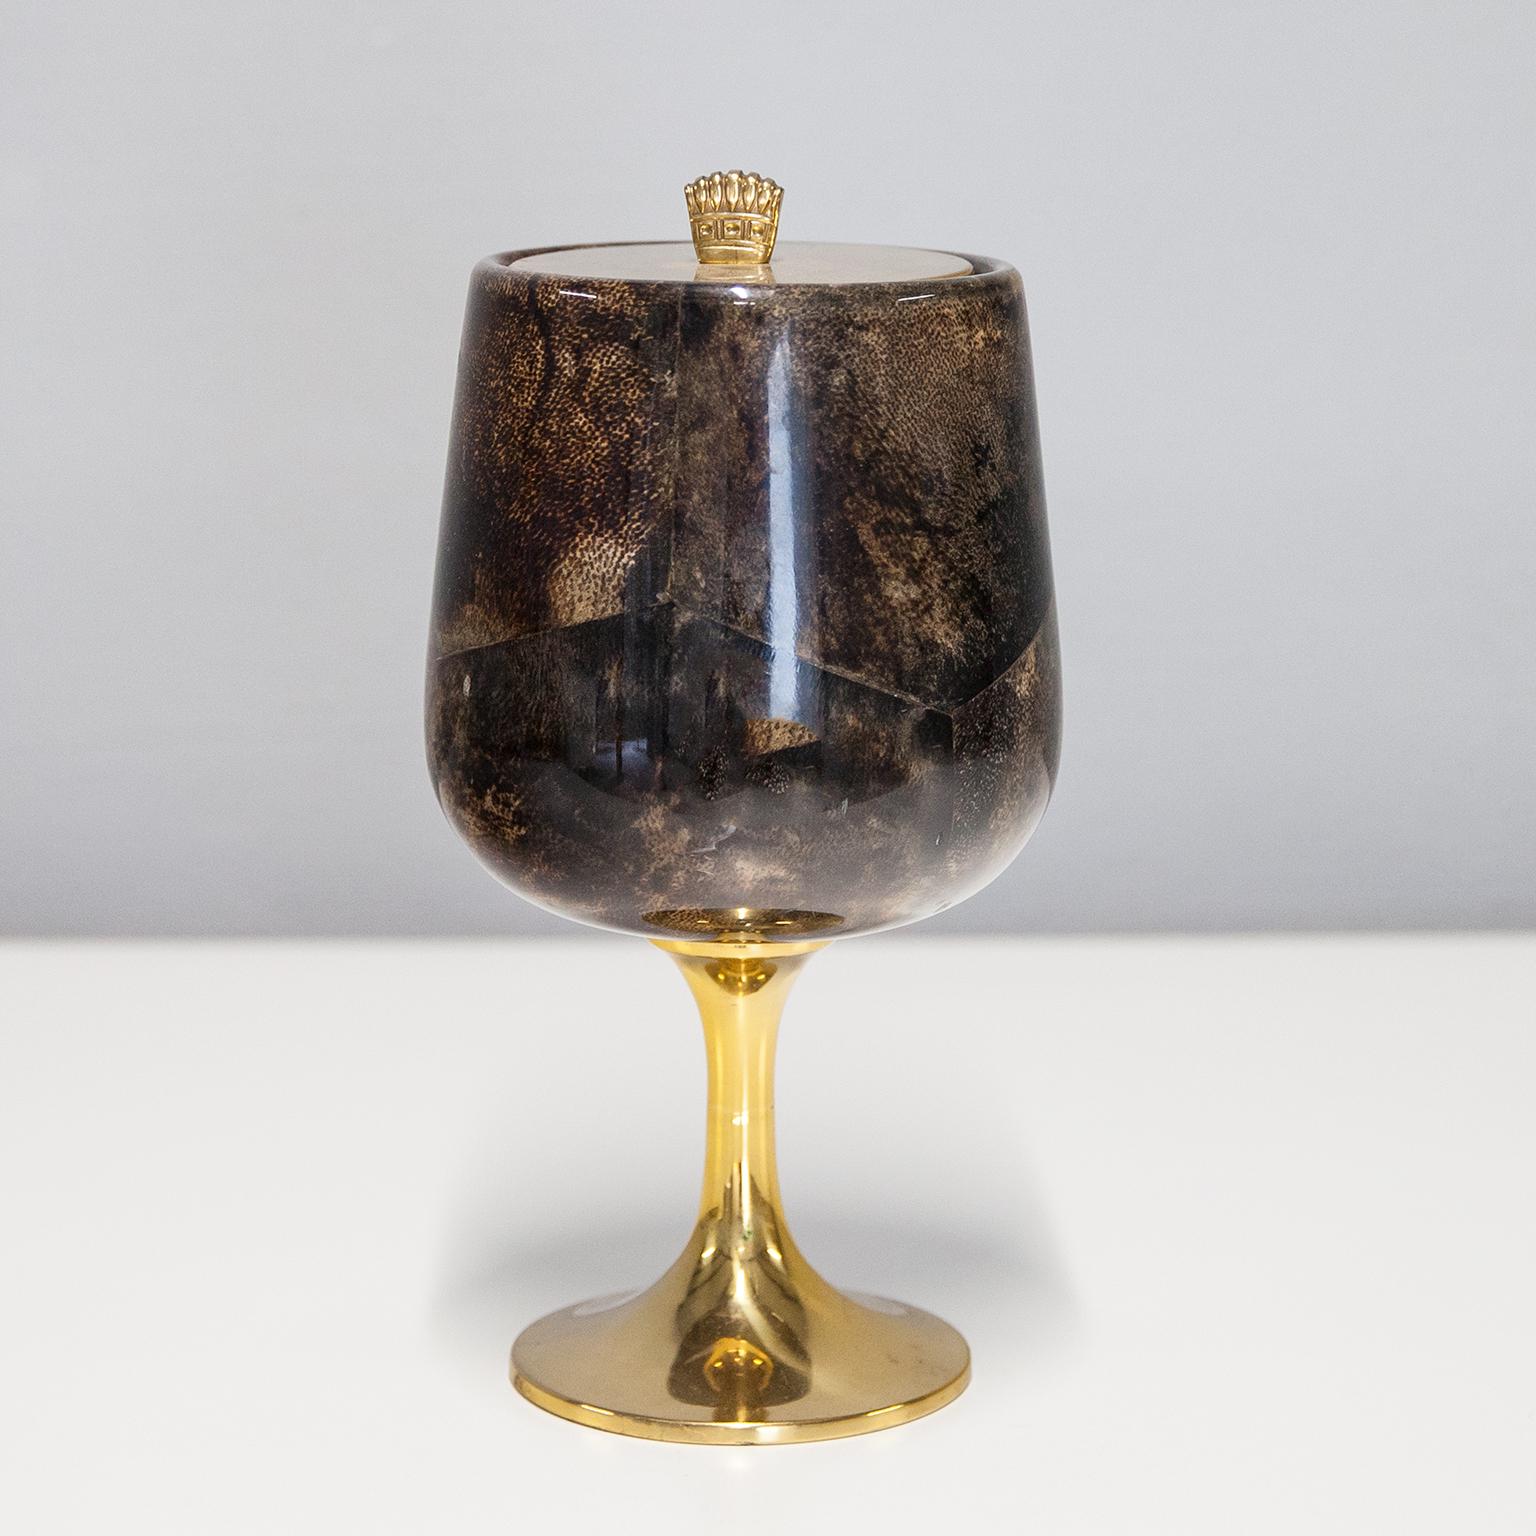 Wonderful ice bucket by Aldo Tura in brown parchment and a glass inlay, in excellent vintage condition. Along with artists like Piero Fornasetti and Carlo Bugatti, Aldo Tura (1909-1963) definitely belonged to the mavericks of Italian design. Where